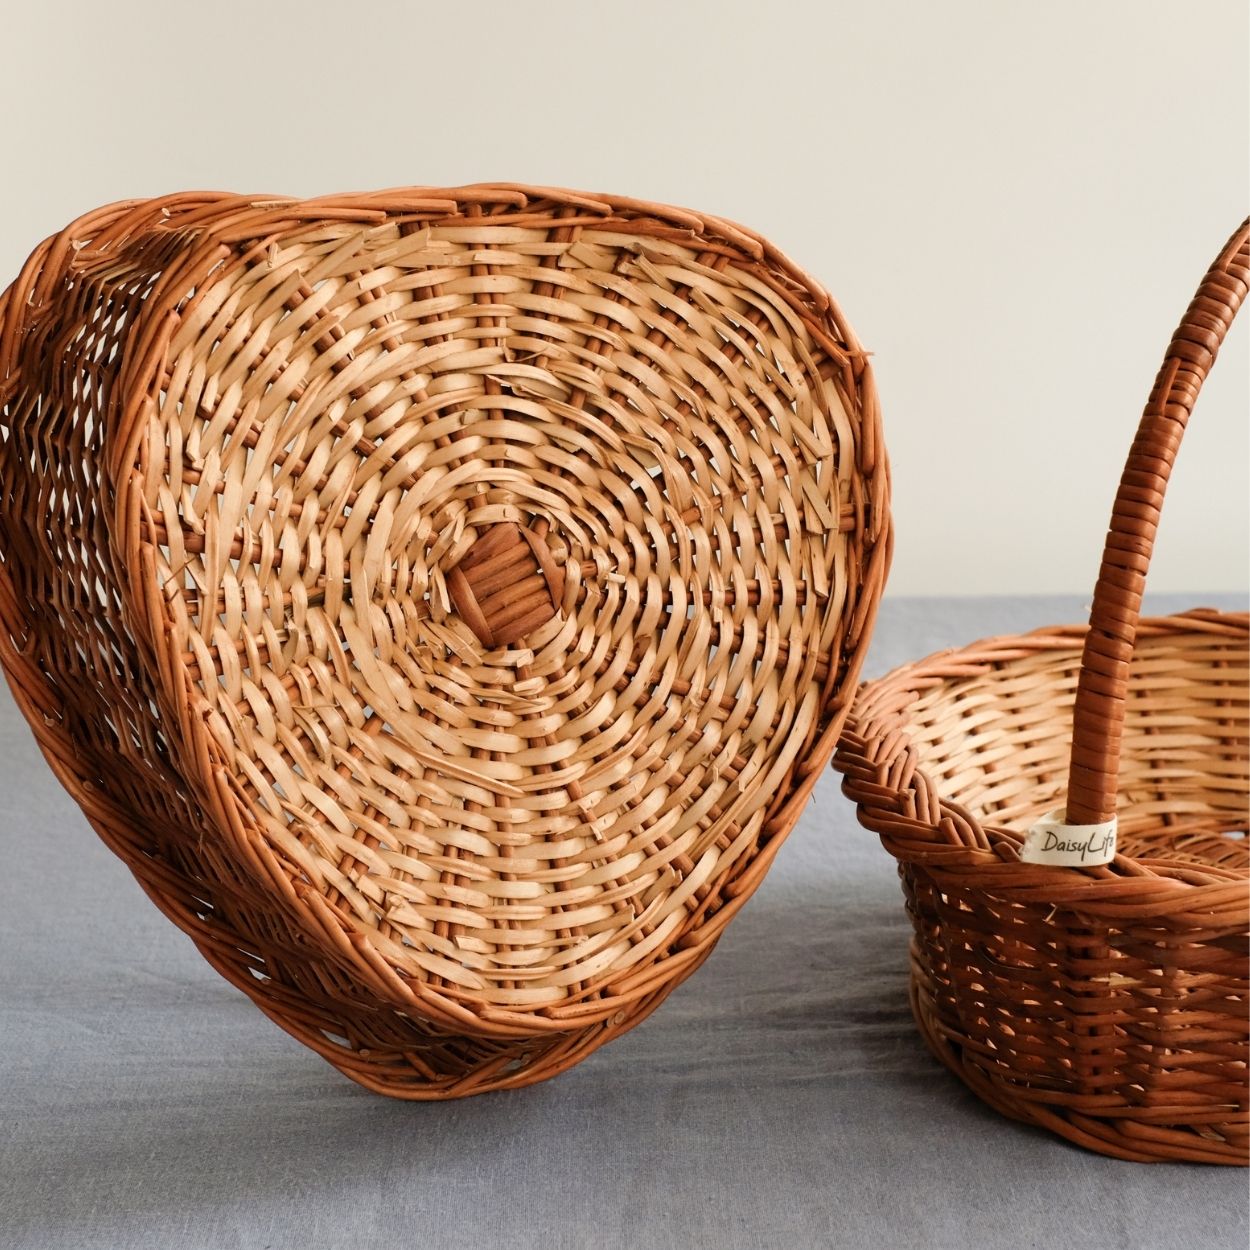 DaisyLife Heart Wicker Basket for corporate gifting, festive and personal gifting